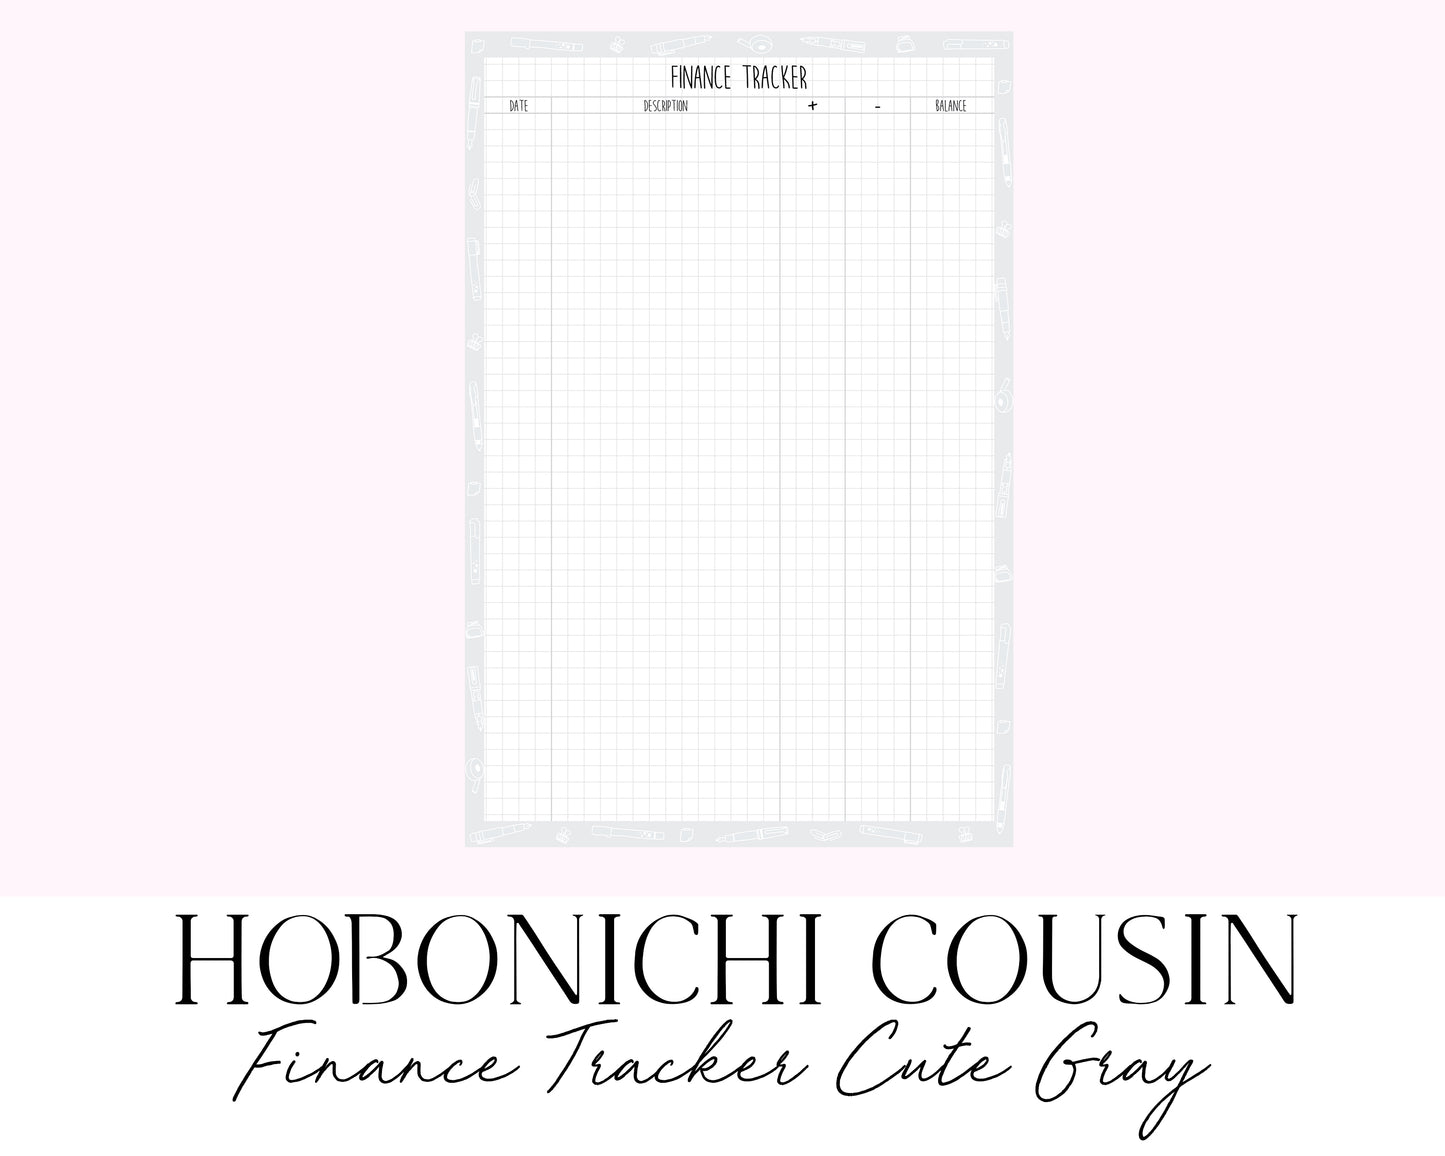 Hobonichi Cousin A5 Finance Tracker Cute Gray (Full Page Printable Stickers)